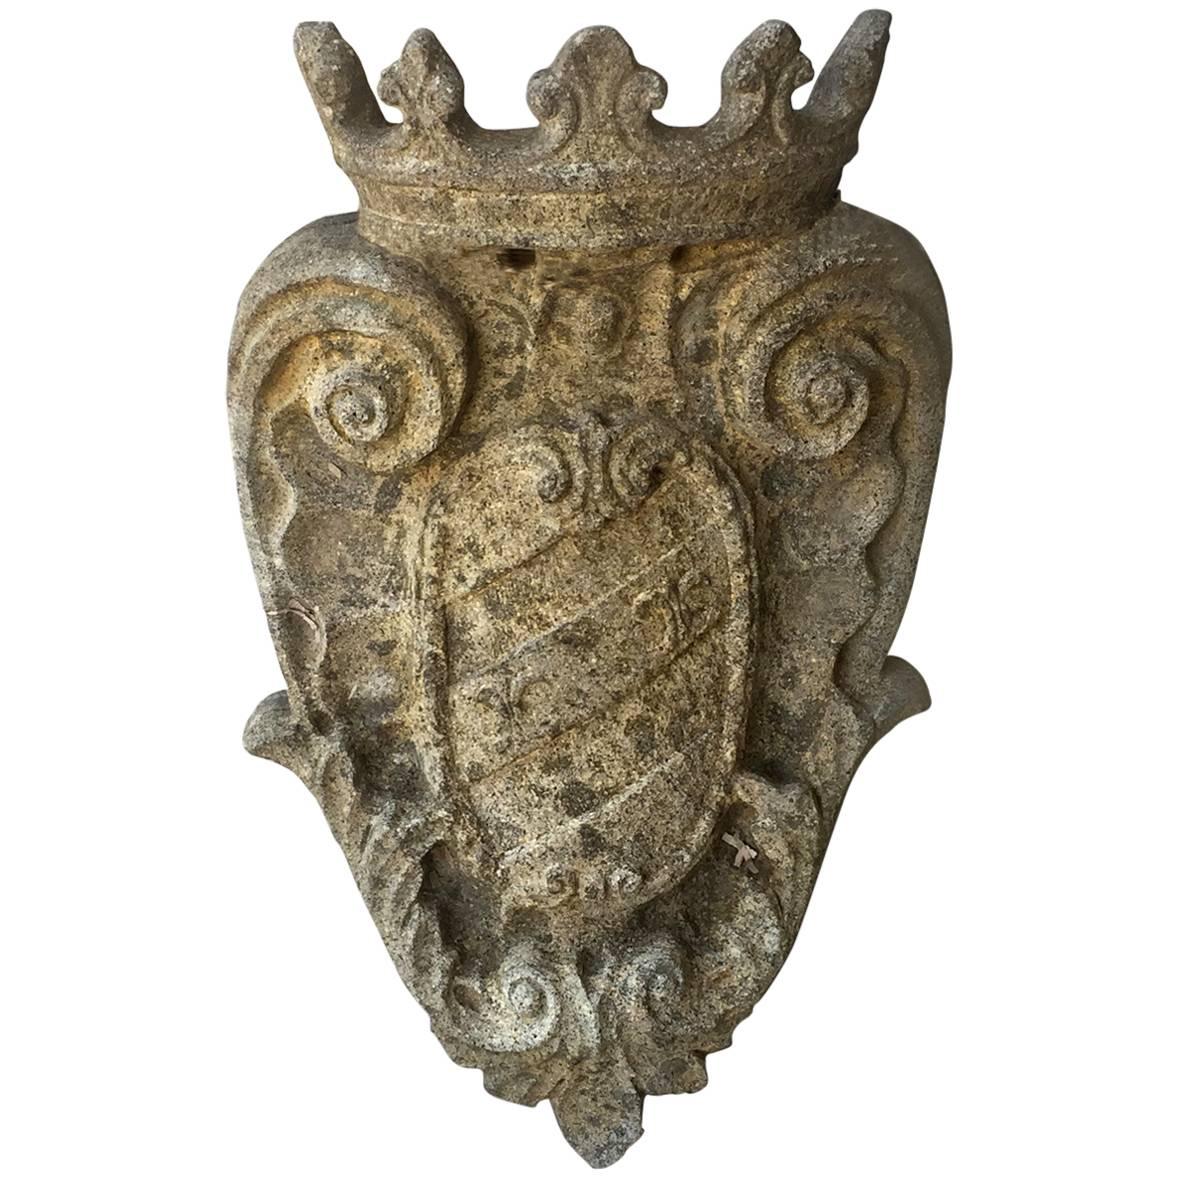 Antique Louis XVI Stone Element from Umbria with Intricate Carvings, circa 1780